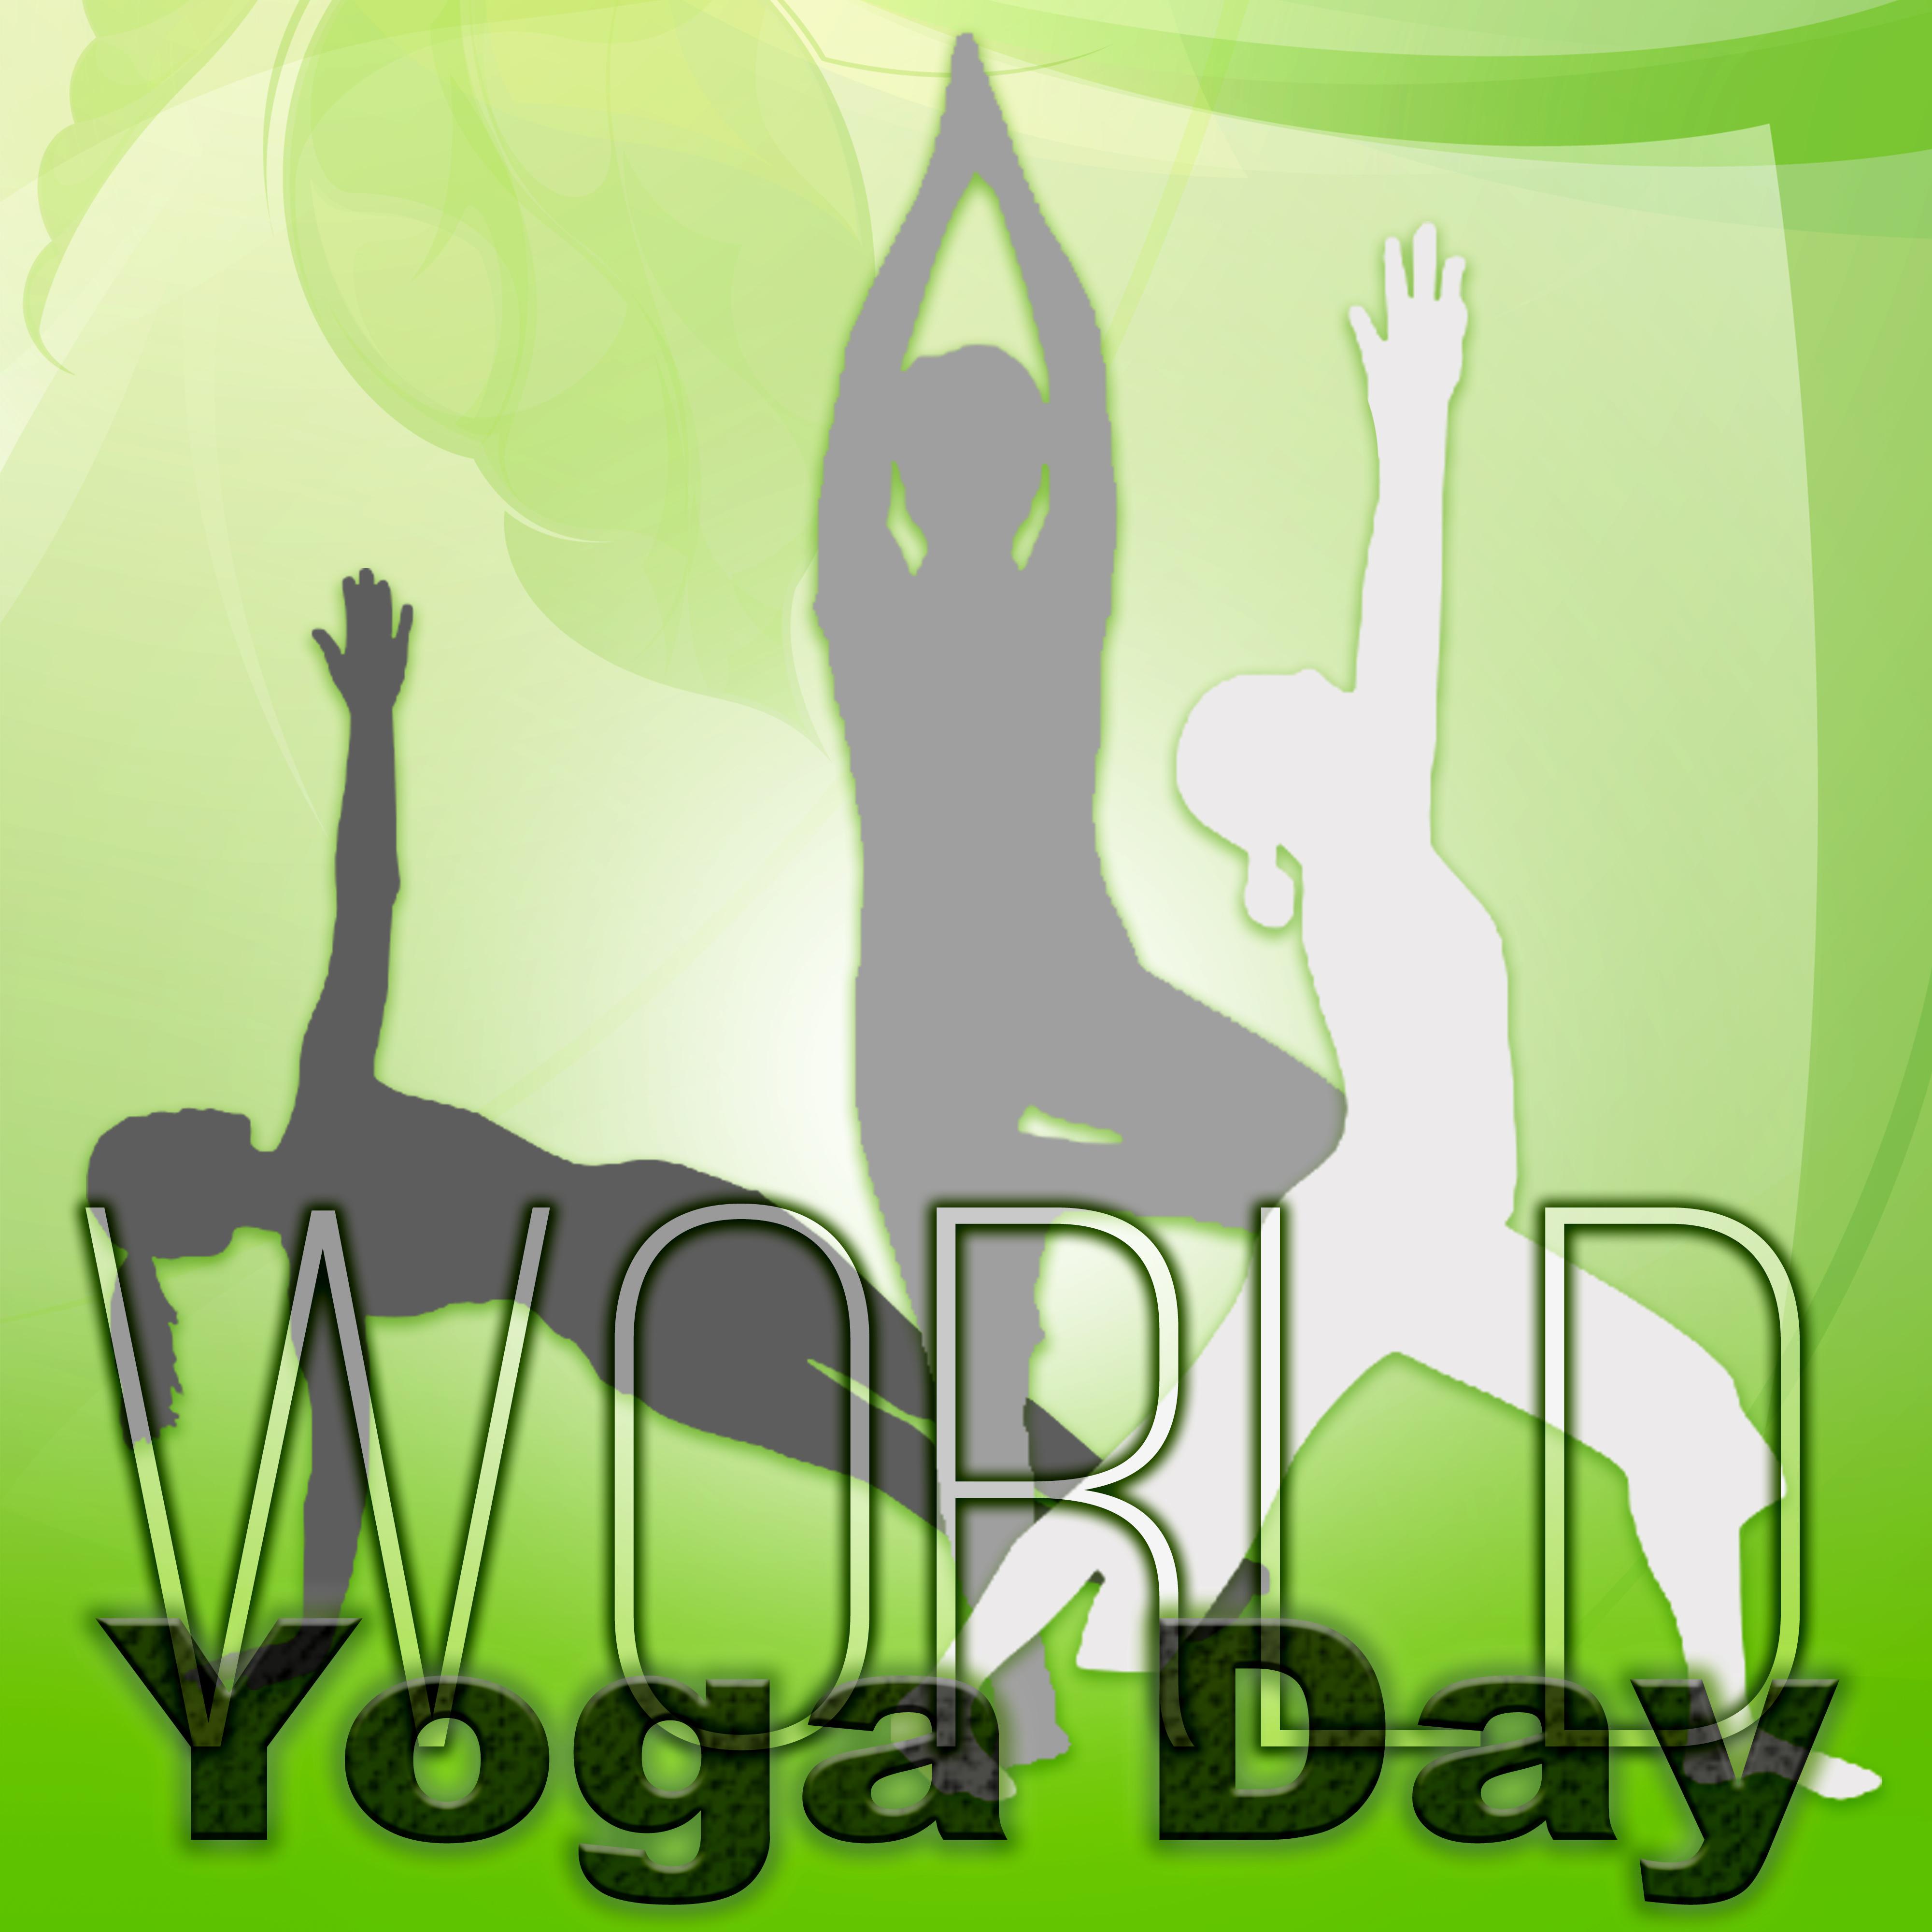 World Yoga Day  Calming Music for Yoga Exercises, Hatha Yoga Classes, Mindfulness Meditation, Relaxing Sounds for Deep Breathing, Yin Yoga